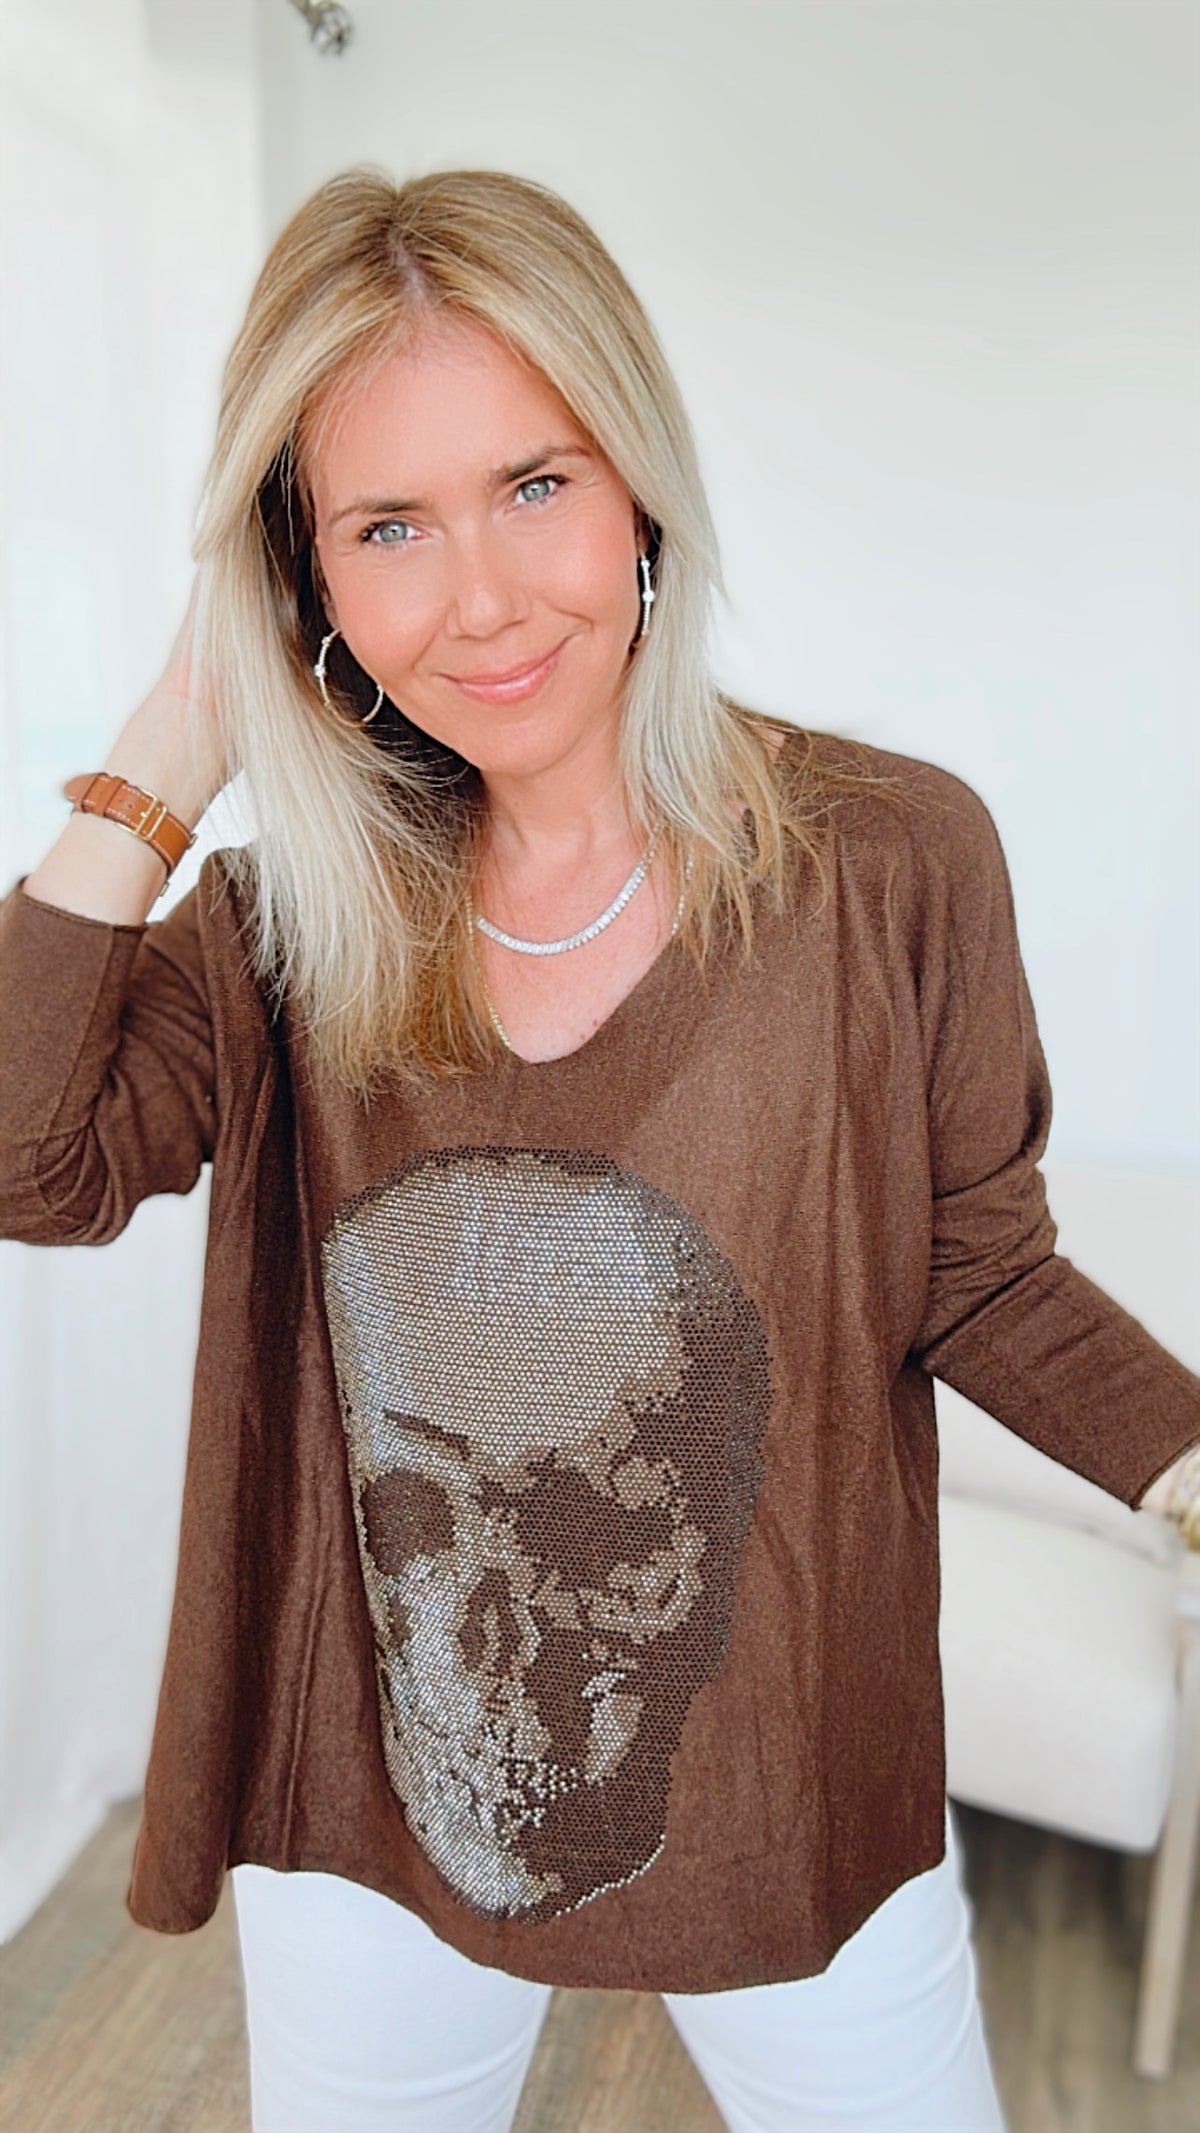 Italian Cz Skull V-Neck Knit Top - Chocolate-130 Long Sleeve Tops-Venti6-Coastal Bloom Boutique, find the trendiest versions of the popular styles and looks Located in Indialantic, FL